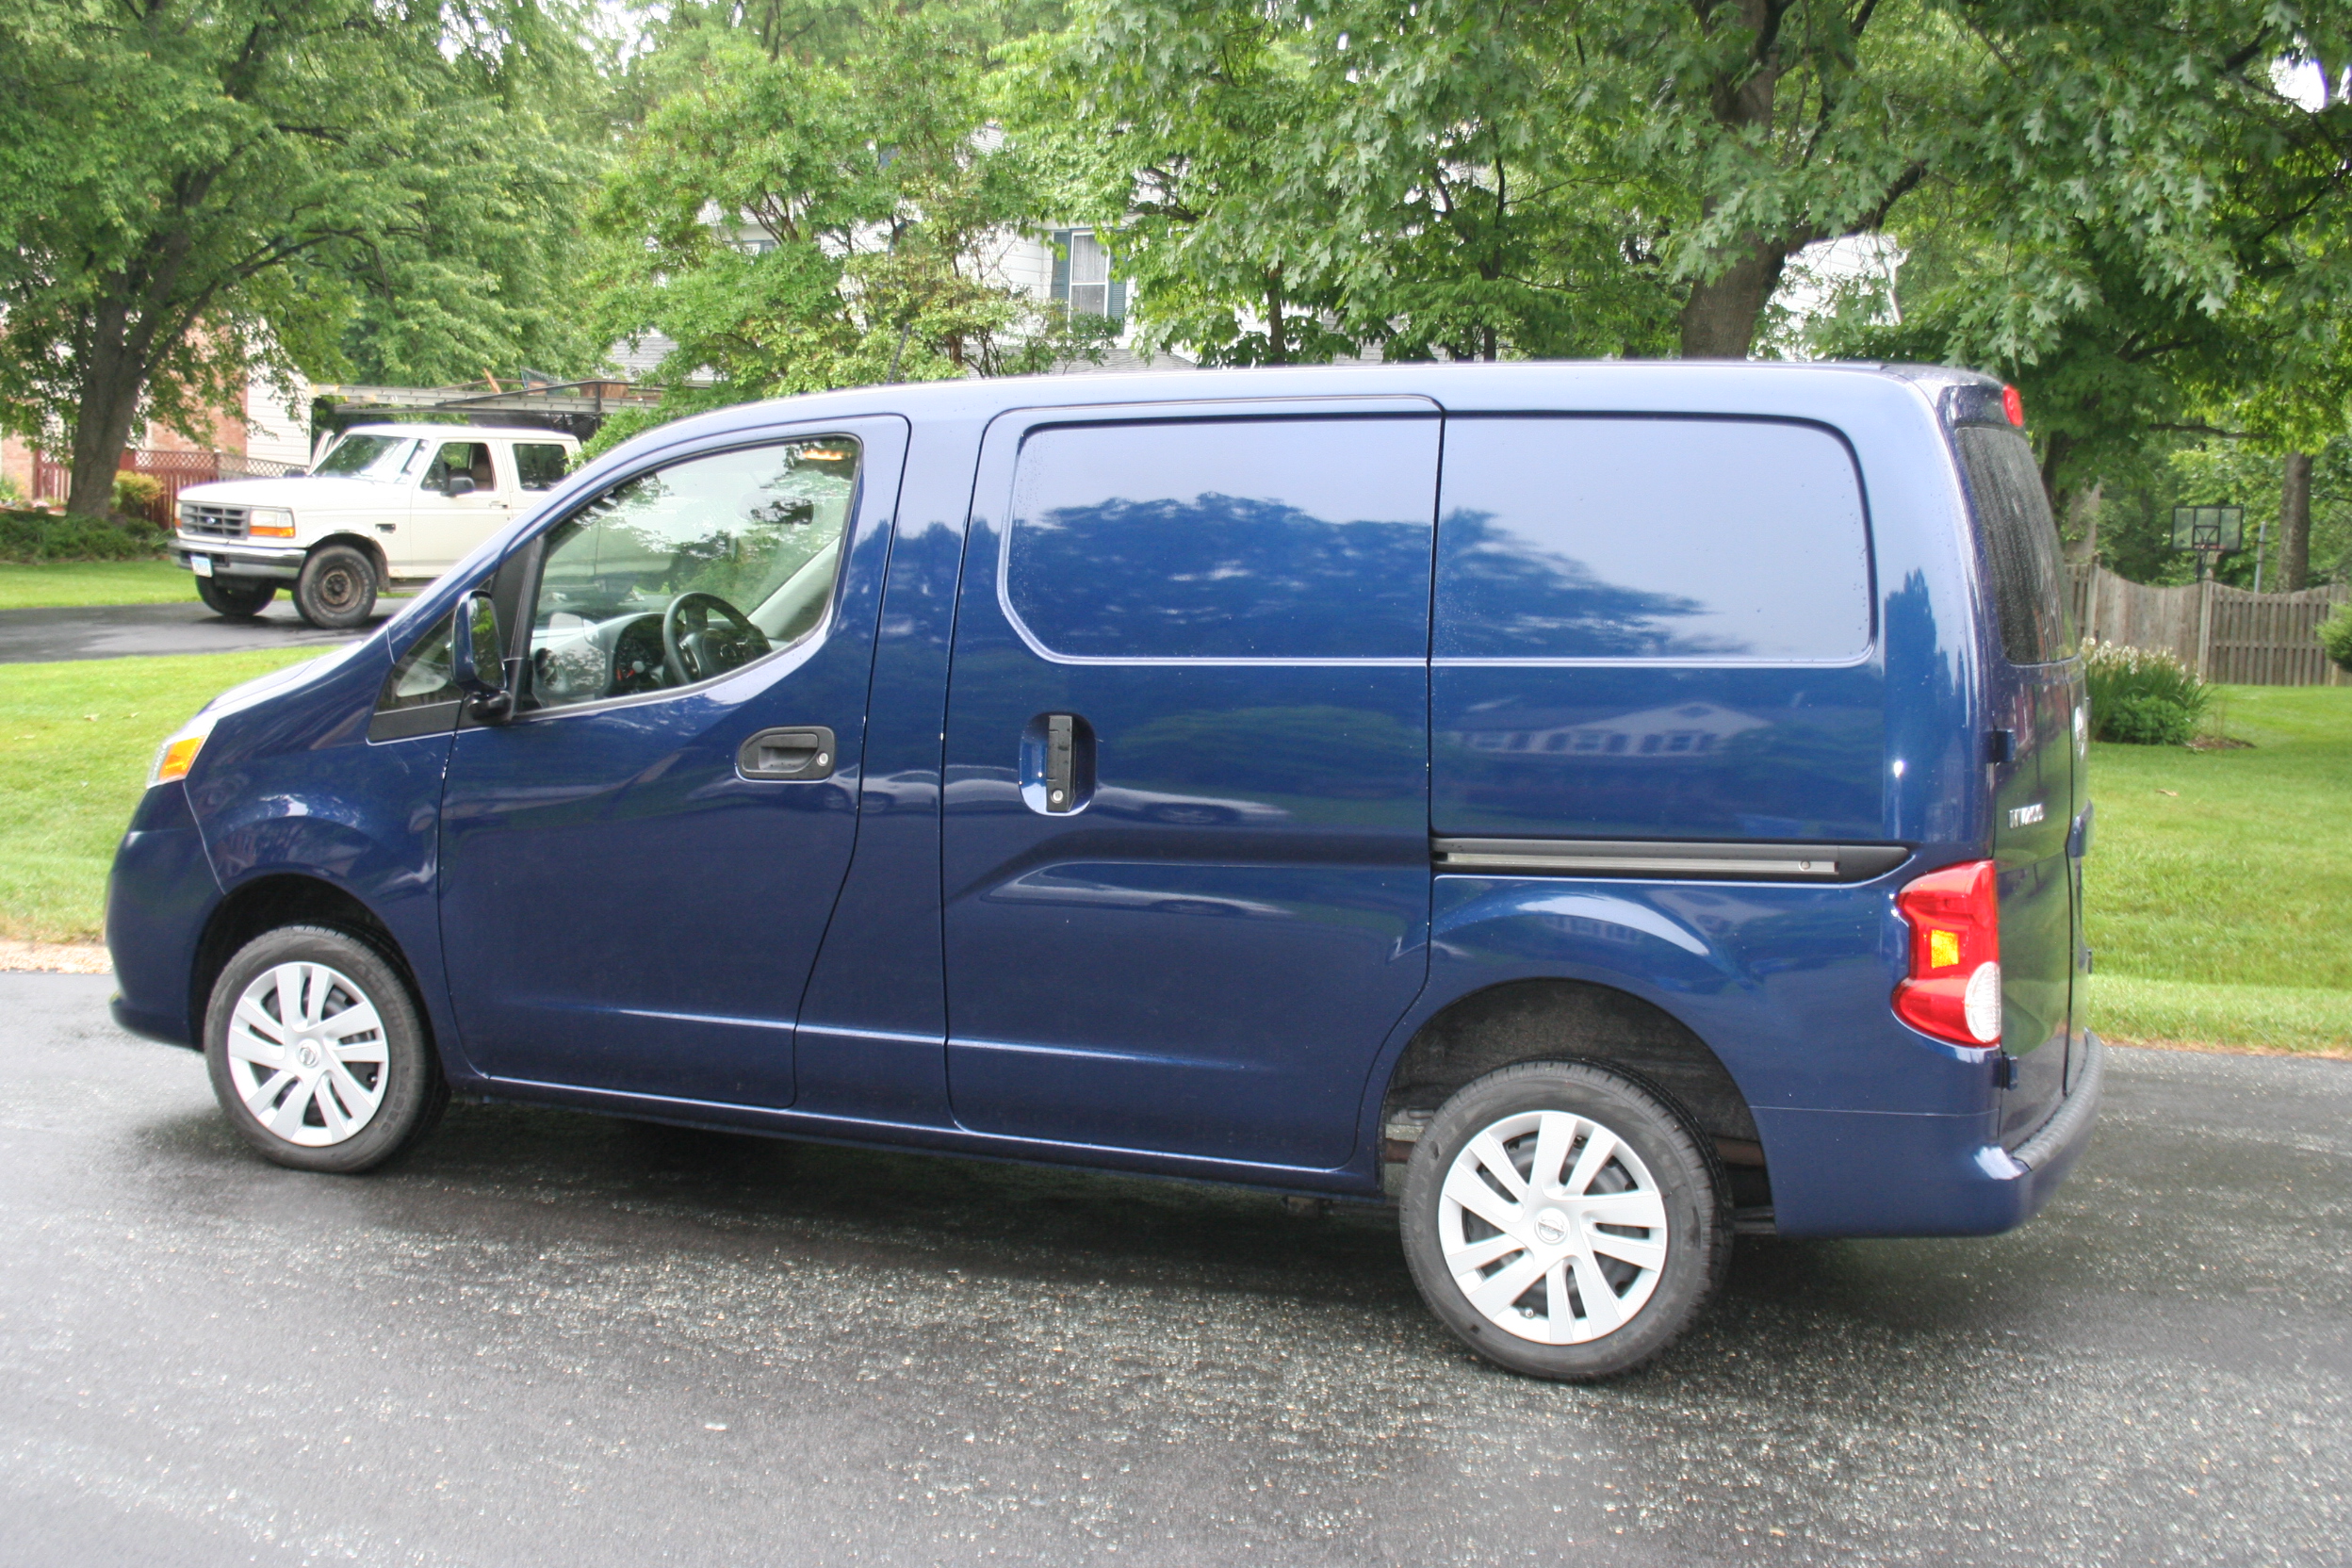 Car Report: Nissan NV200 cargo van is an efficient small-scale hauler